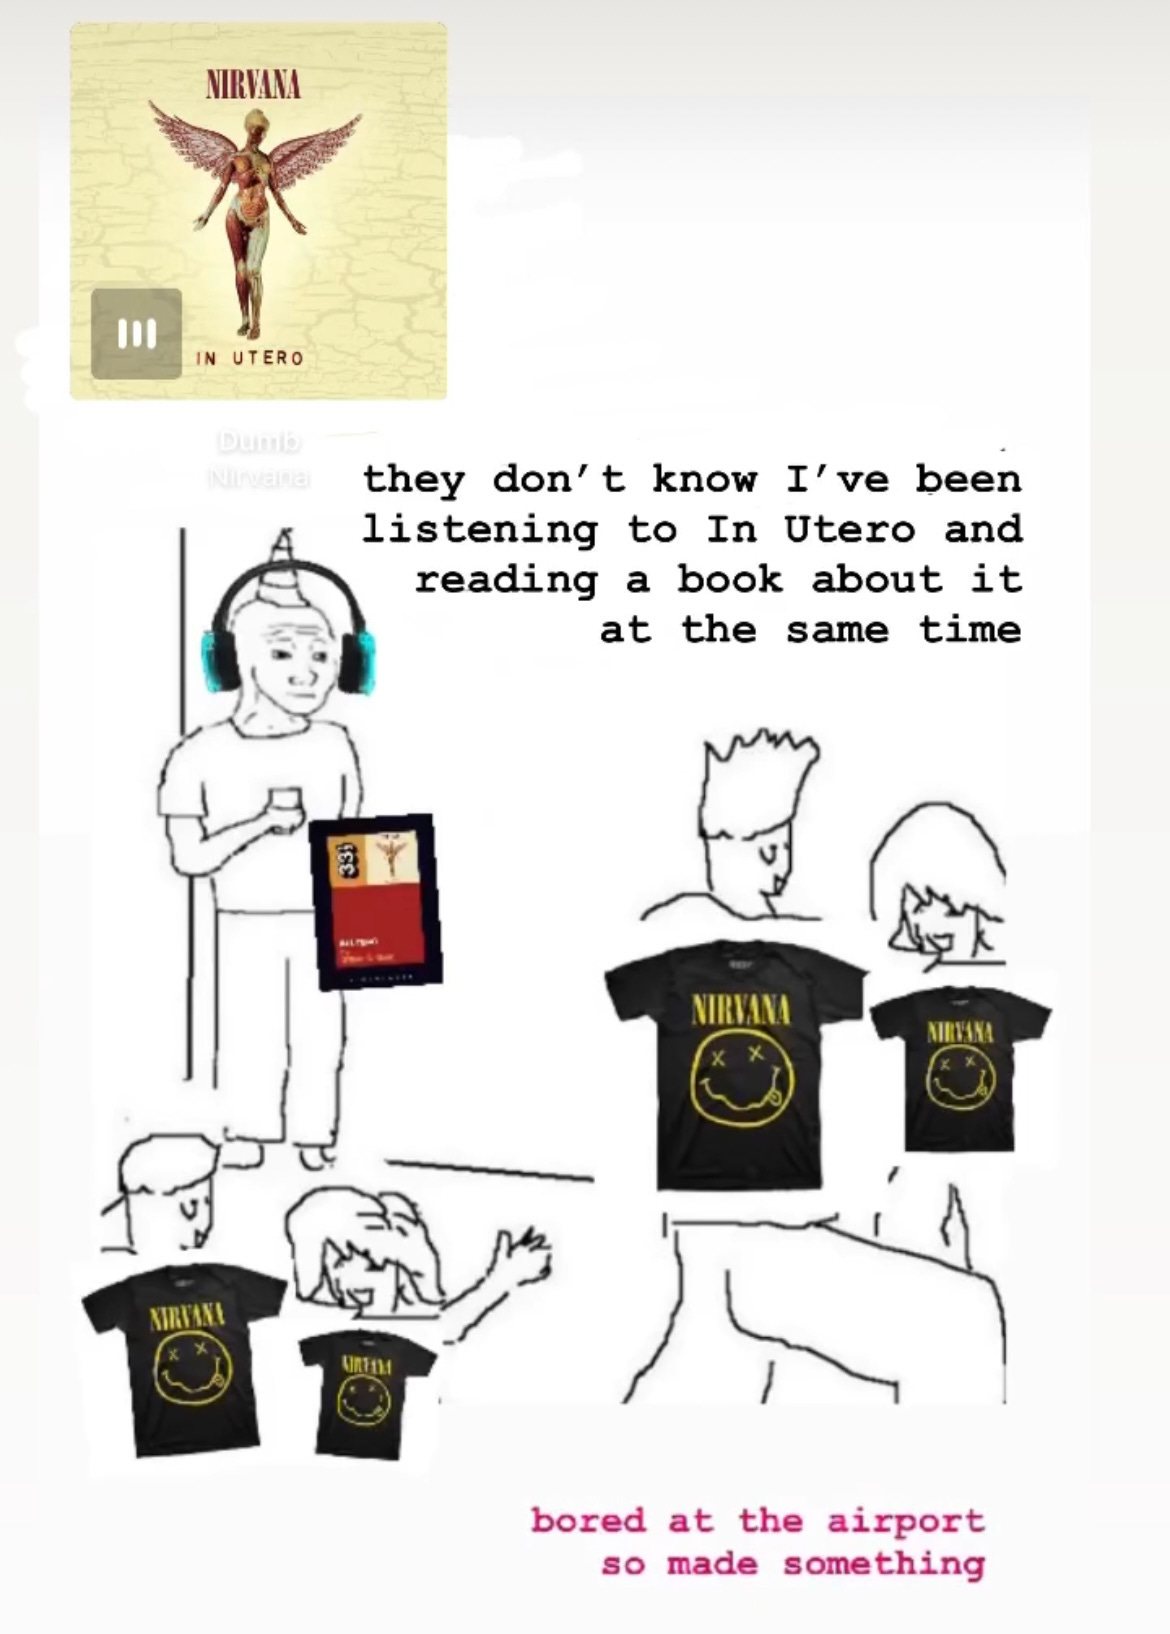 Meme of badly drawn guy standing in a corner at a party, where "Dumb" from In Utero is playing and he has little headphones on and is holding a copy of the In Utero Book, and then it says "they don't know I've been listening to In Utero and reading a book about it at the same time" while all the dancing people have Nirvana shirts on. Then at the bottom I wrote "bored at the airport so made something."